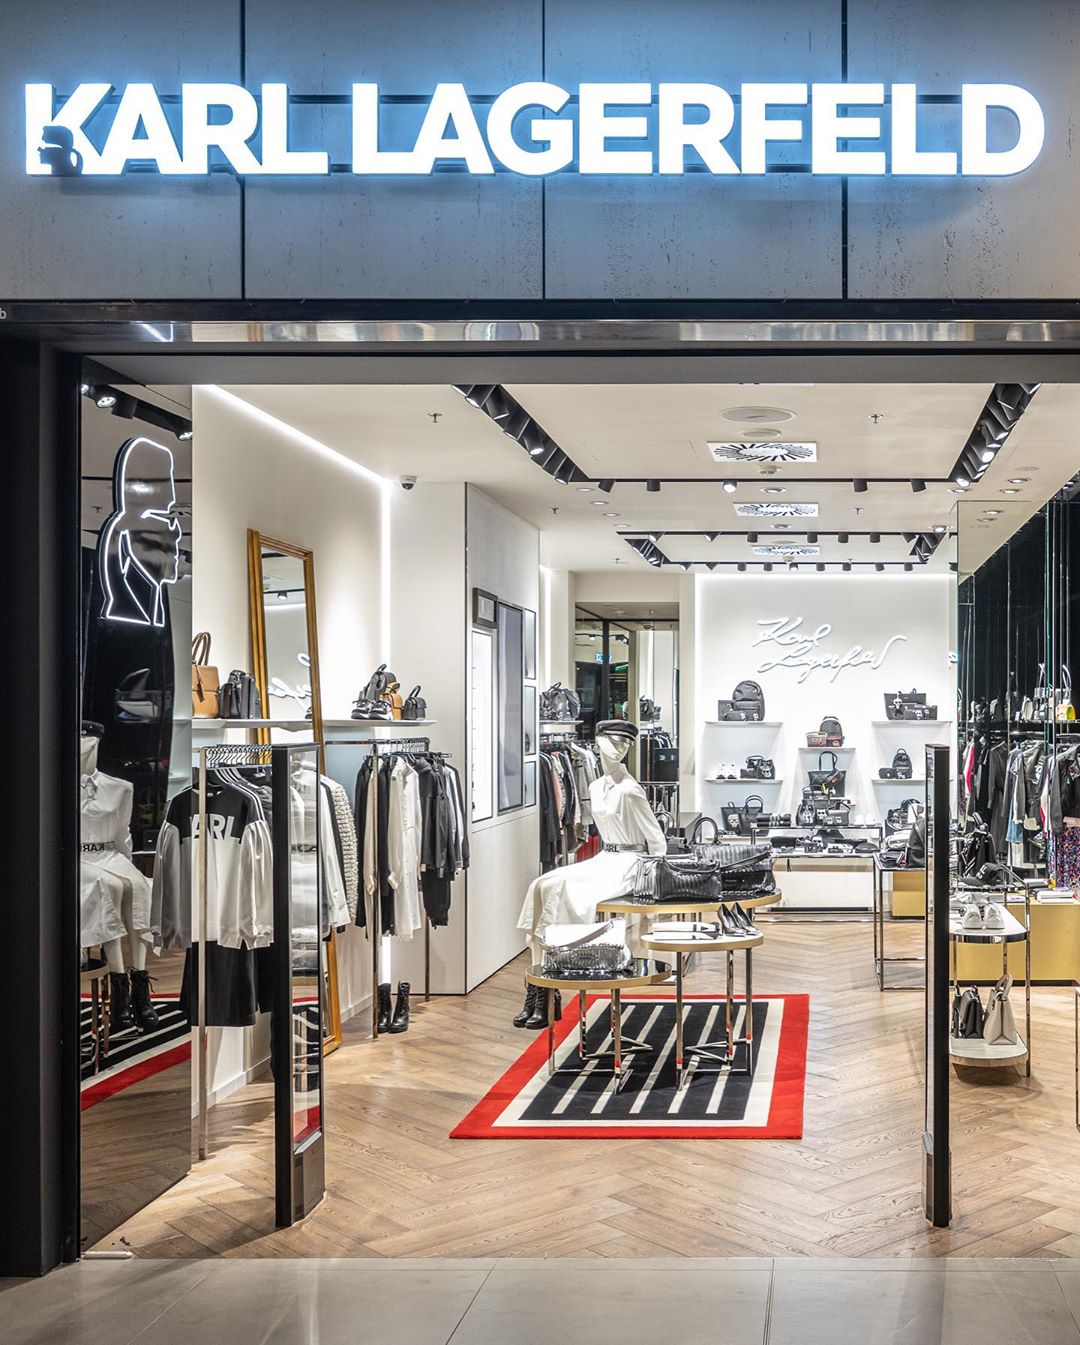 KARL LAGERFELD - Hello, Ostrava! 🇨🇿 A new #KARLLAGERFELD store is now open at the Forum Nová Karolina mall. Store Manager Irena Srubarová and her team look forward to welcoming you! Open daily from...